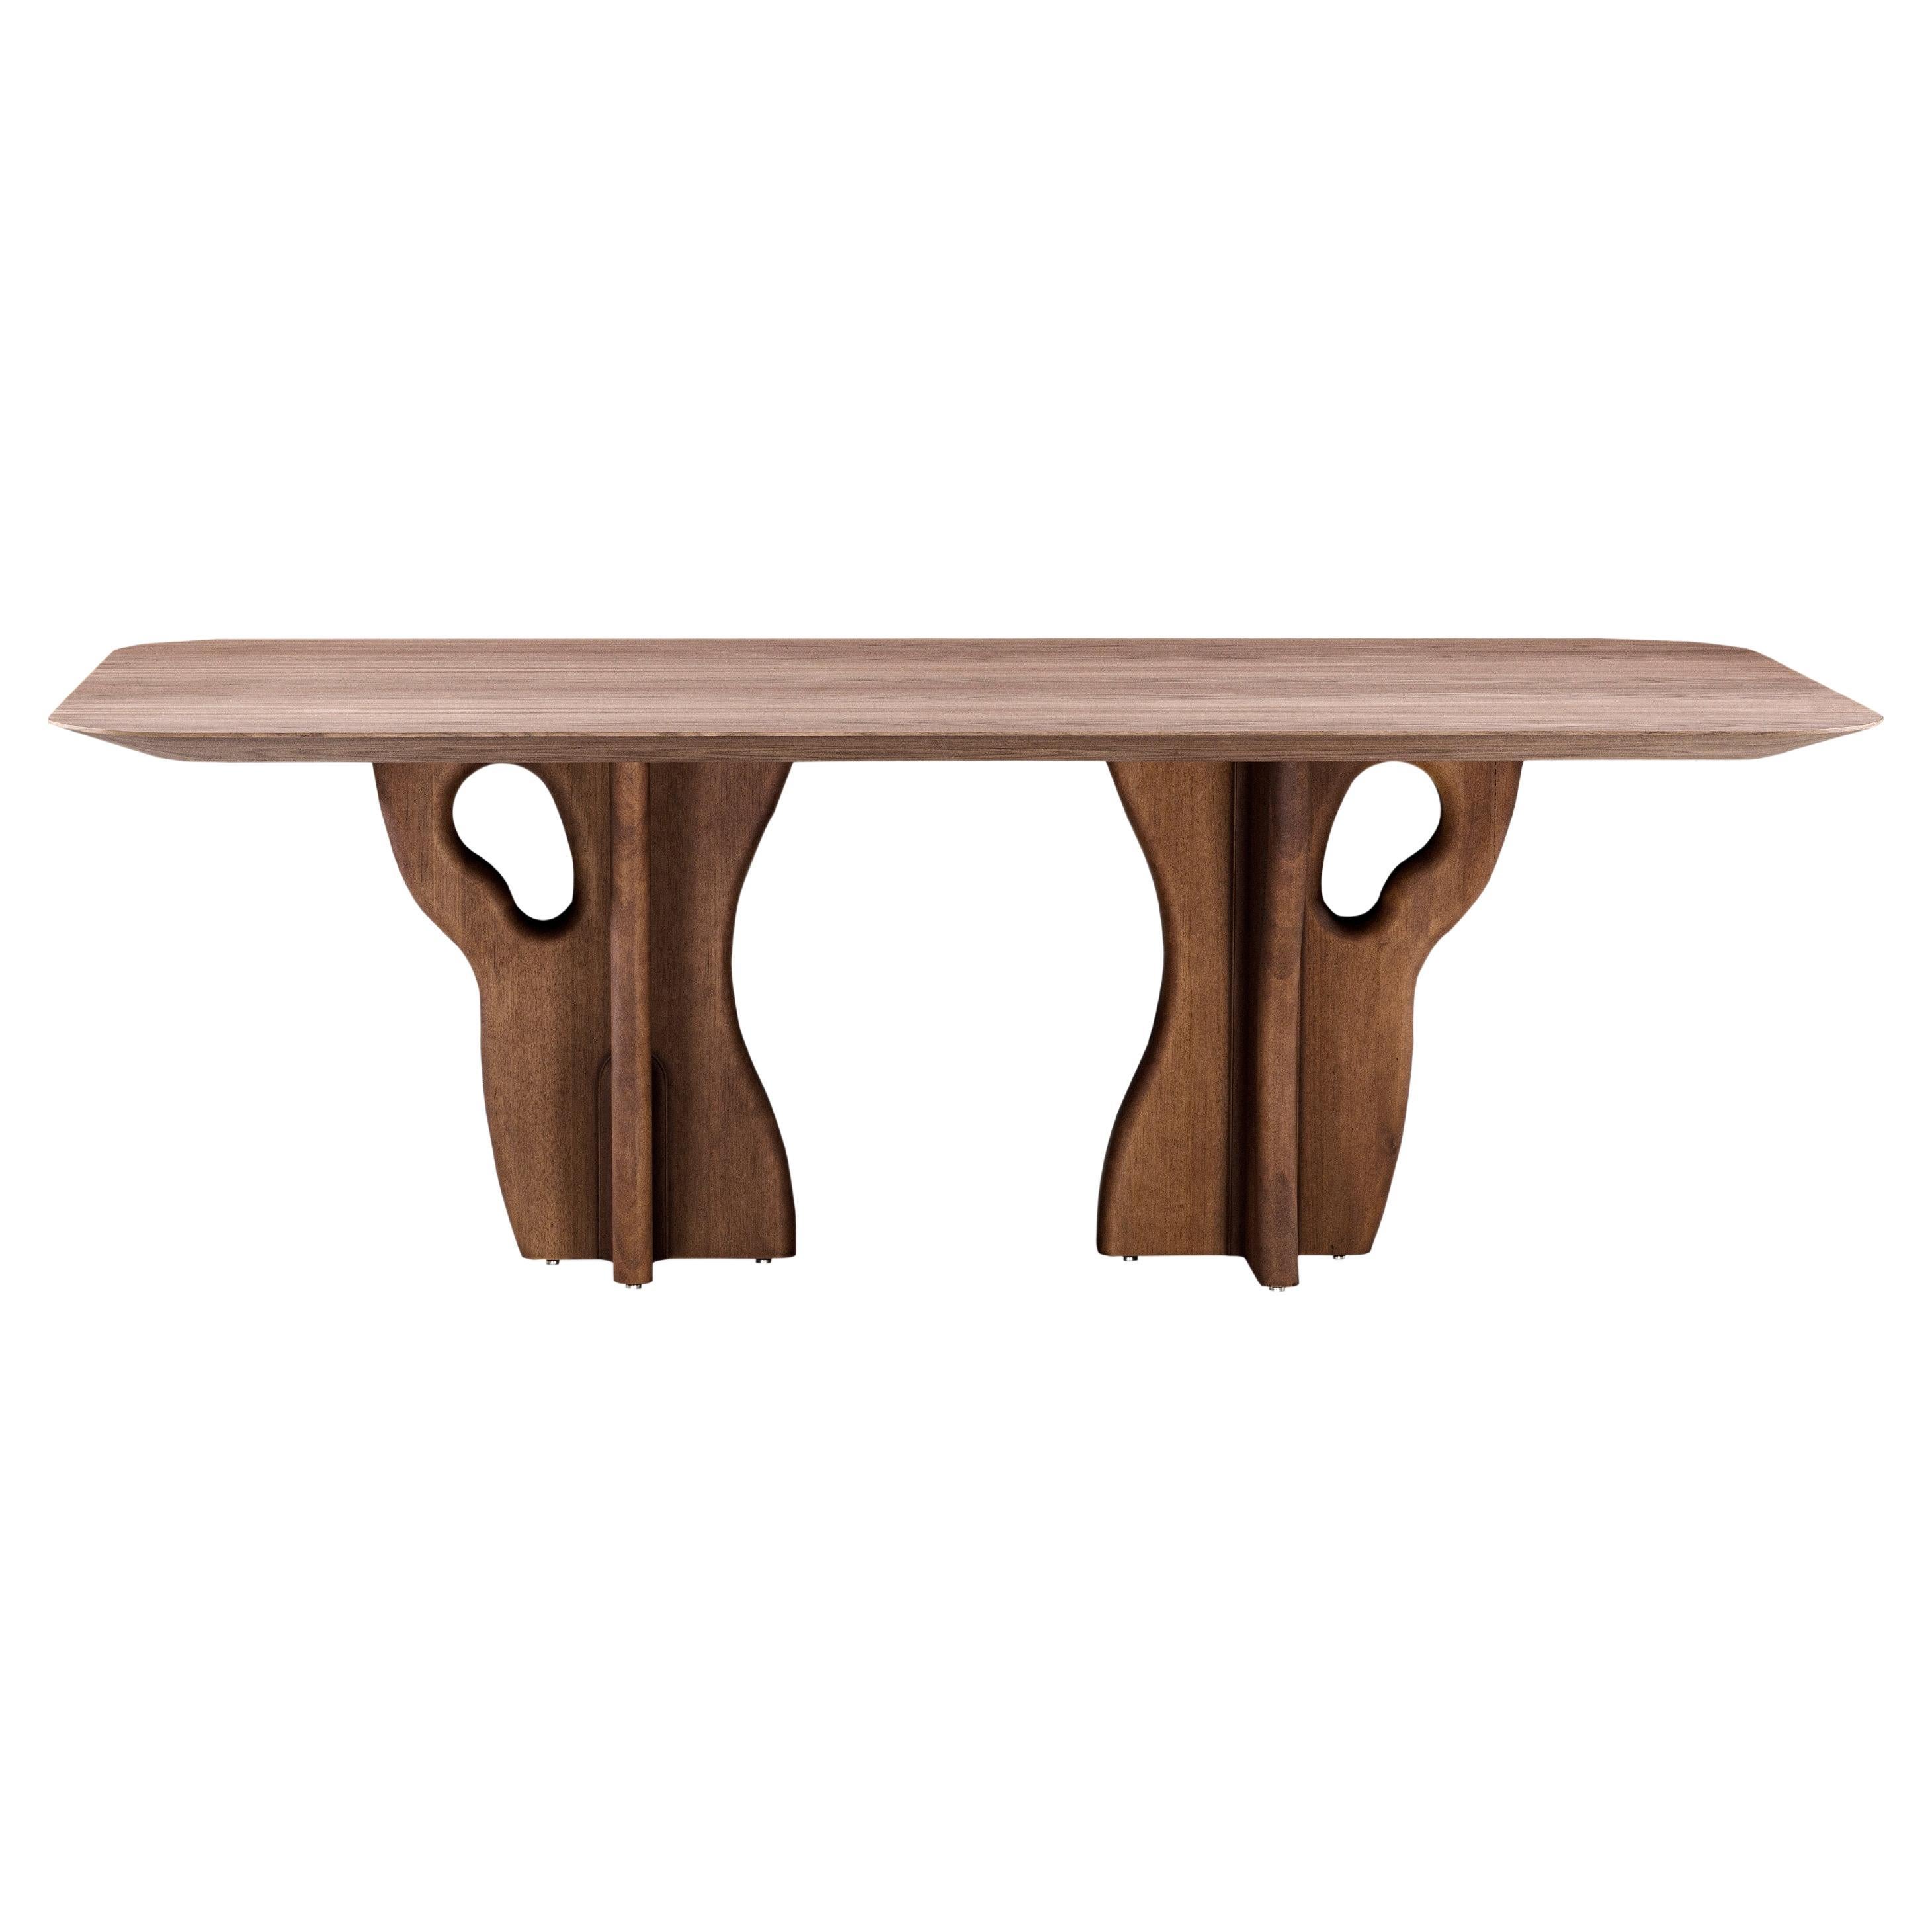 Suma Dining Table with Walnut Veneered Top and Organic Solid Wood Legs 86'' For Sale